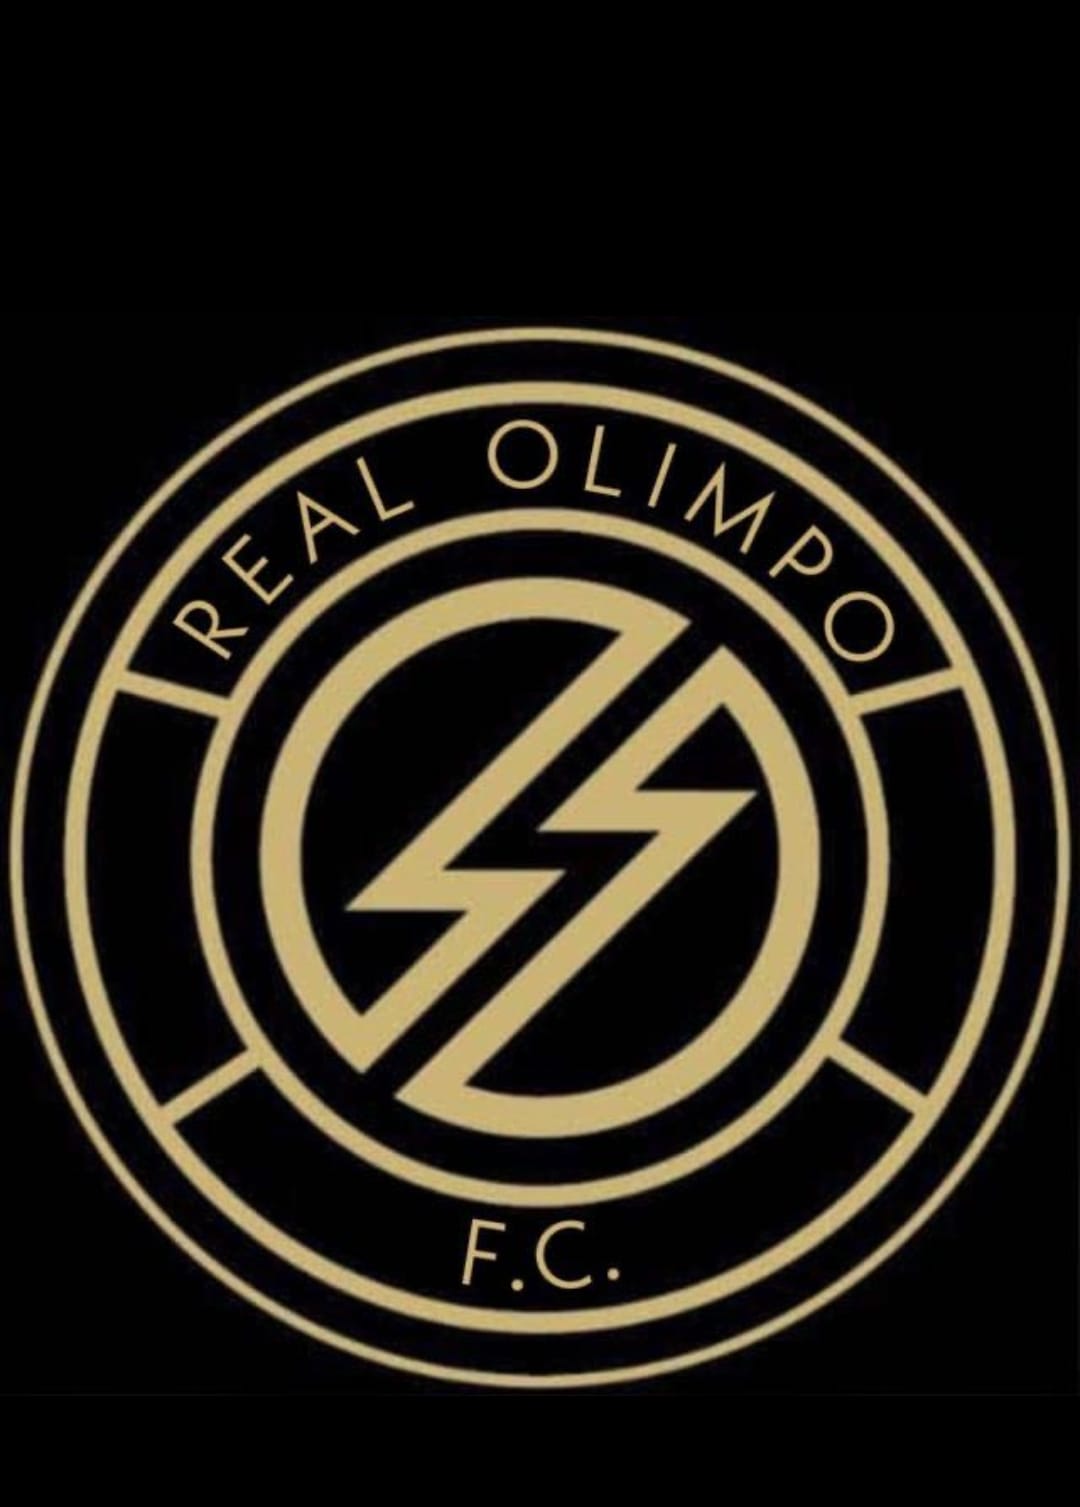 REAL OLIMPO